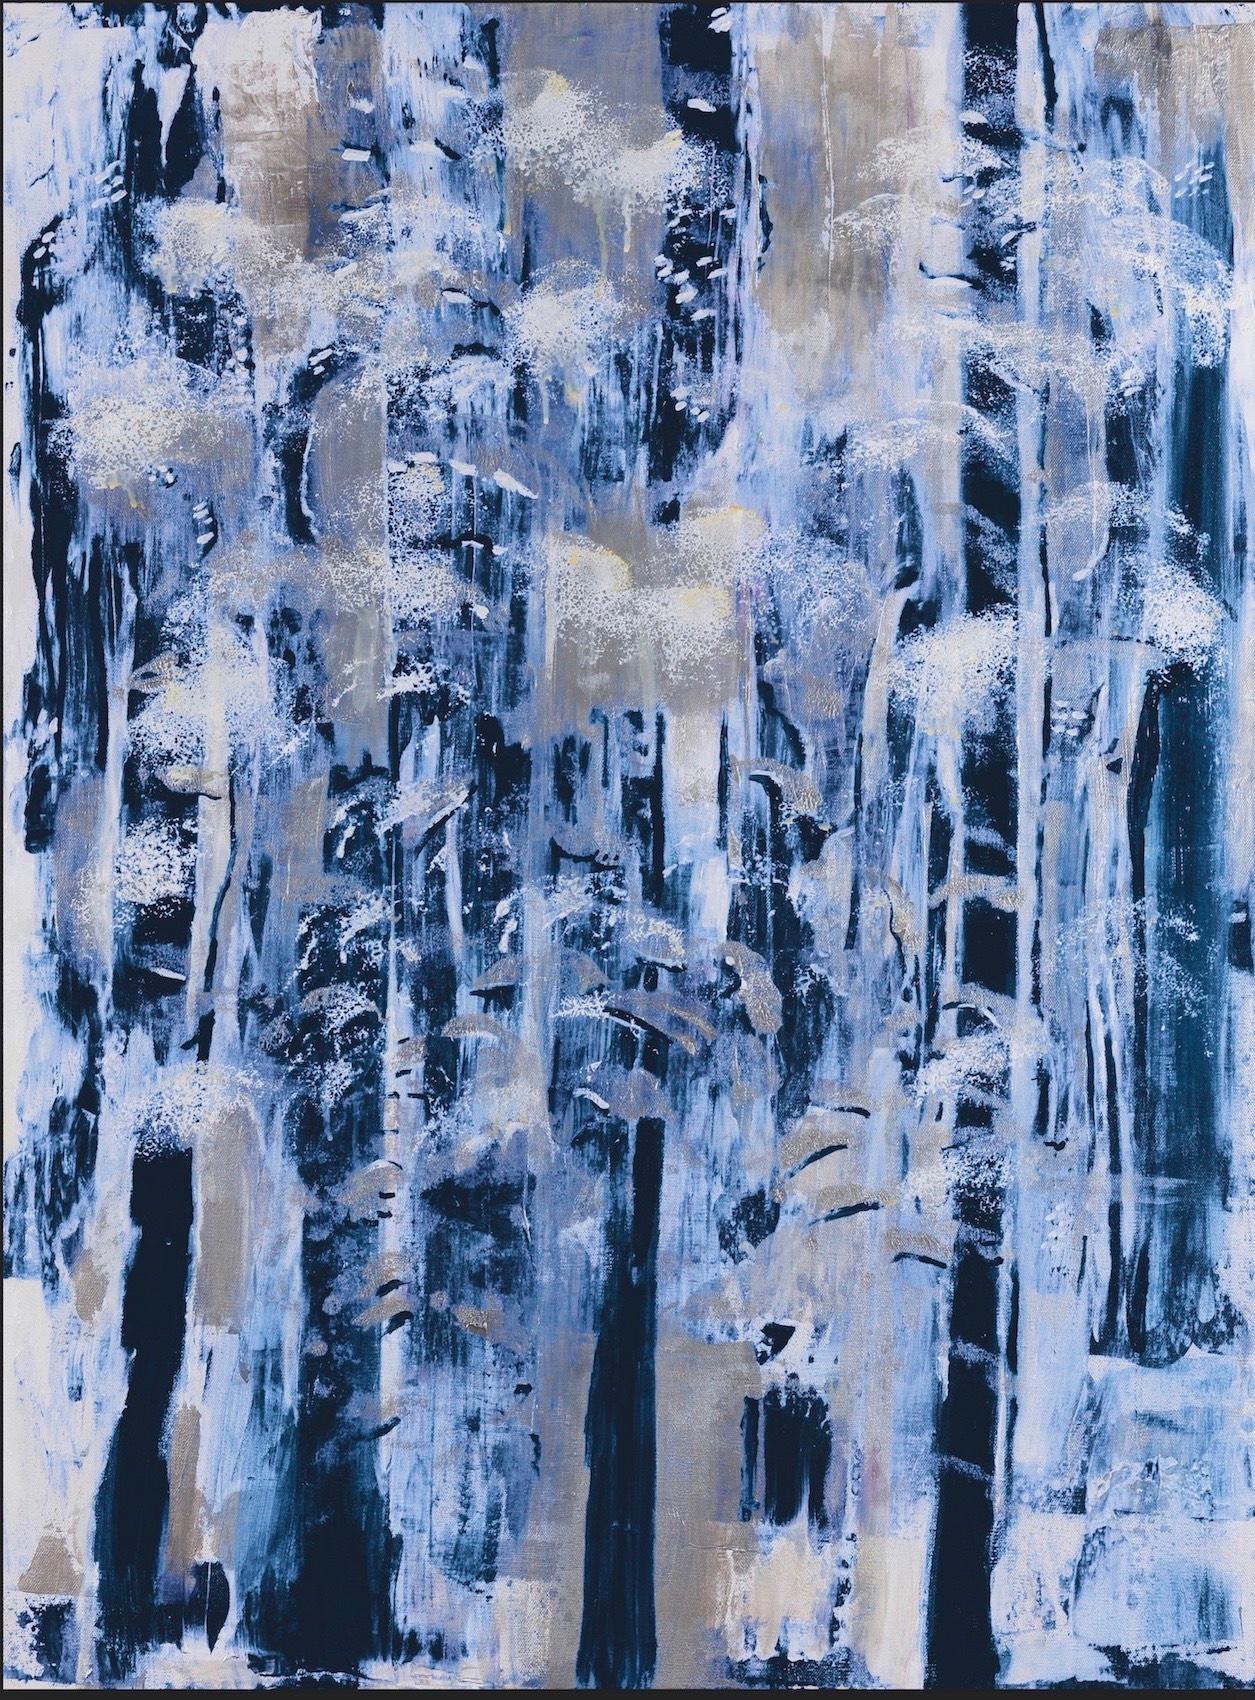 Camilla Webster Landscape Painting - "Evening Trees Midnight and Silver" Figurative Painting, Acrylic on Canvas 